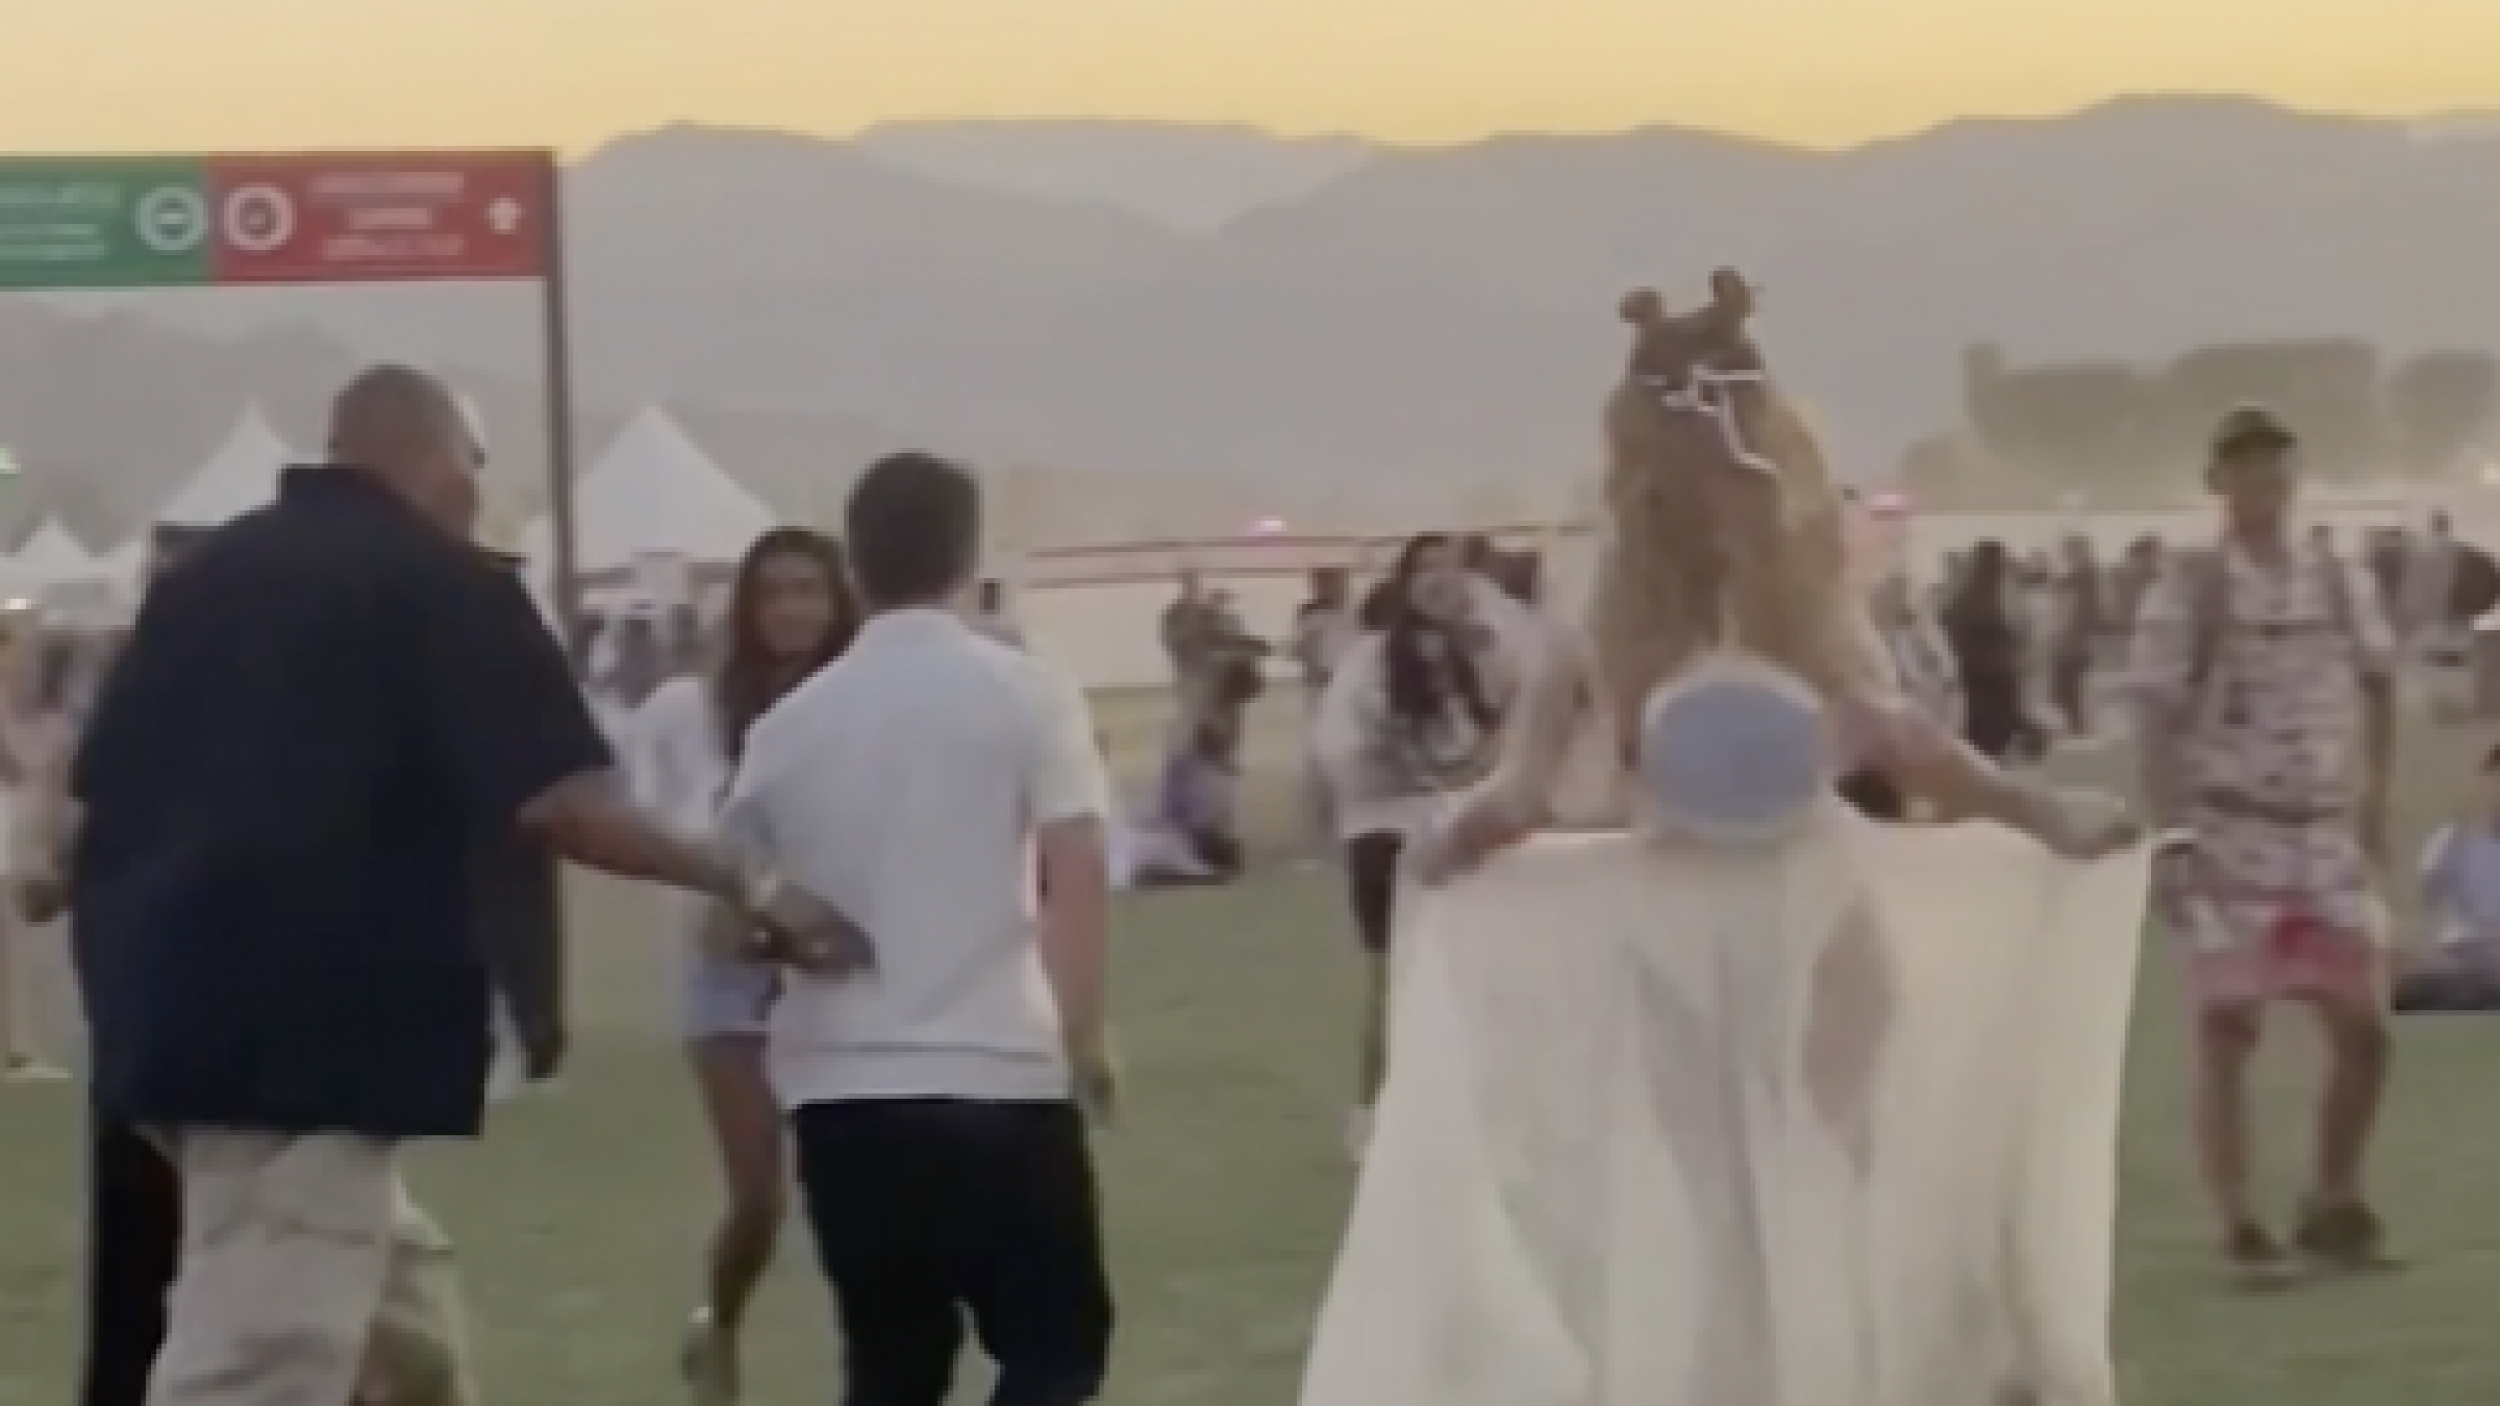 Paris Hiltons Bodyguard Chases Her Through Coachella In Viral Video